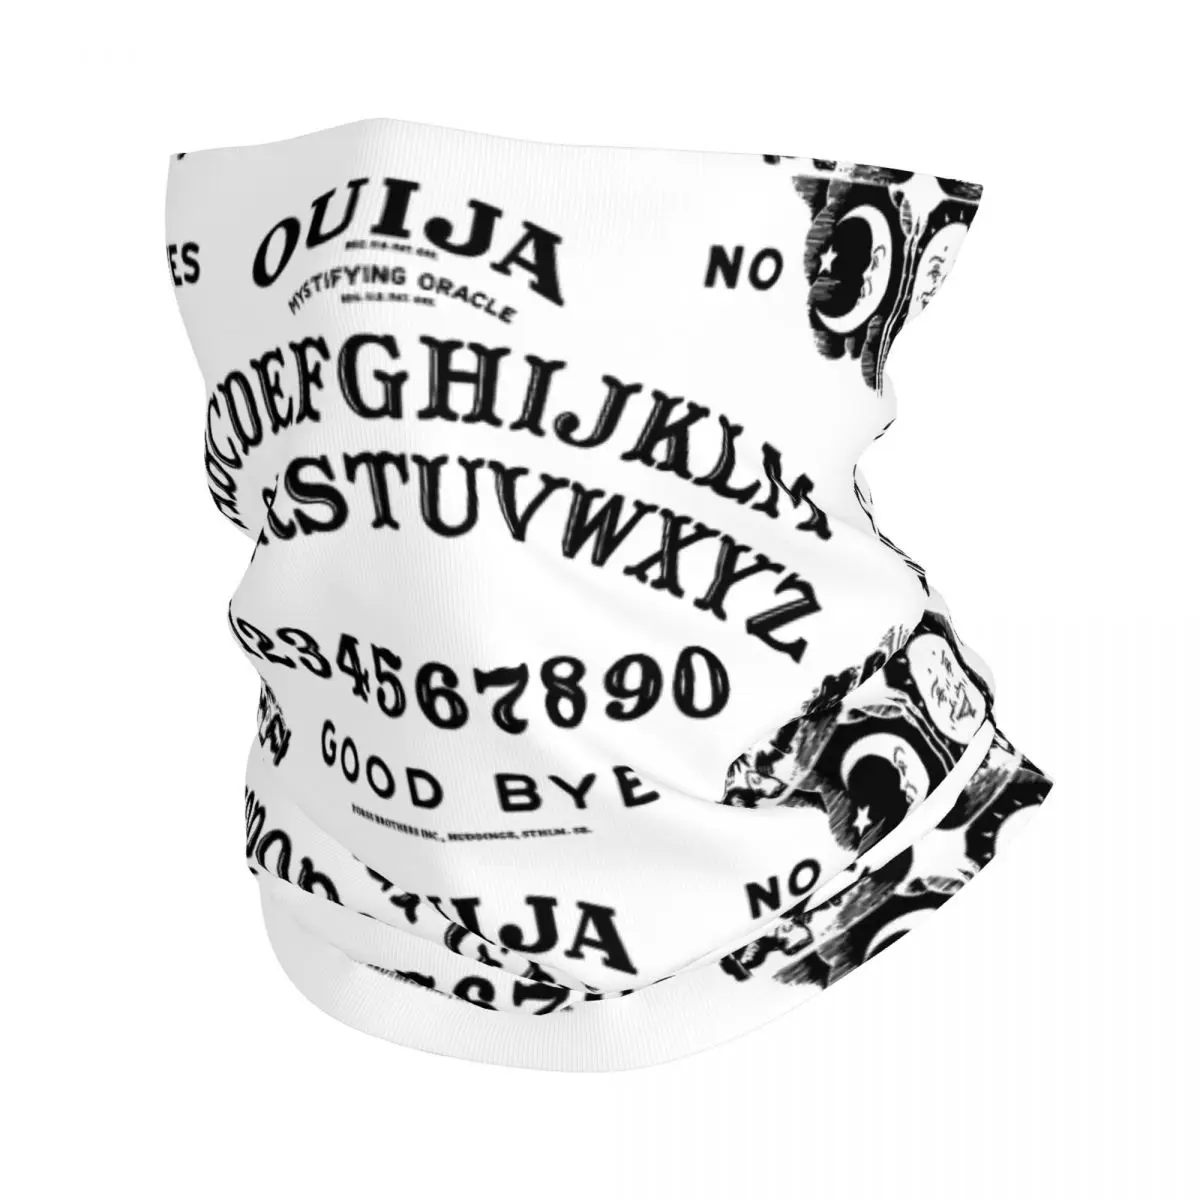 

Ouija Board Bandana Winter Neck Warmer Windproof Wrap Face Scarf for Hiking Halloween Witch Occult Witchcraft Gaiter Headband